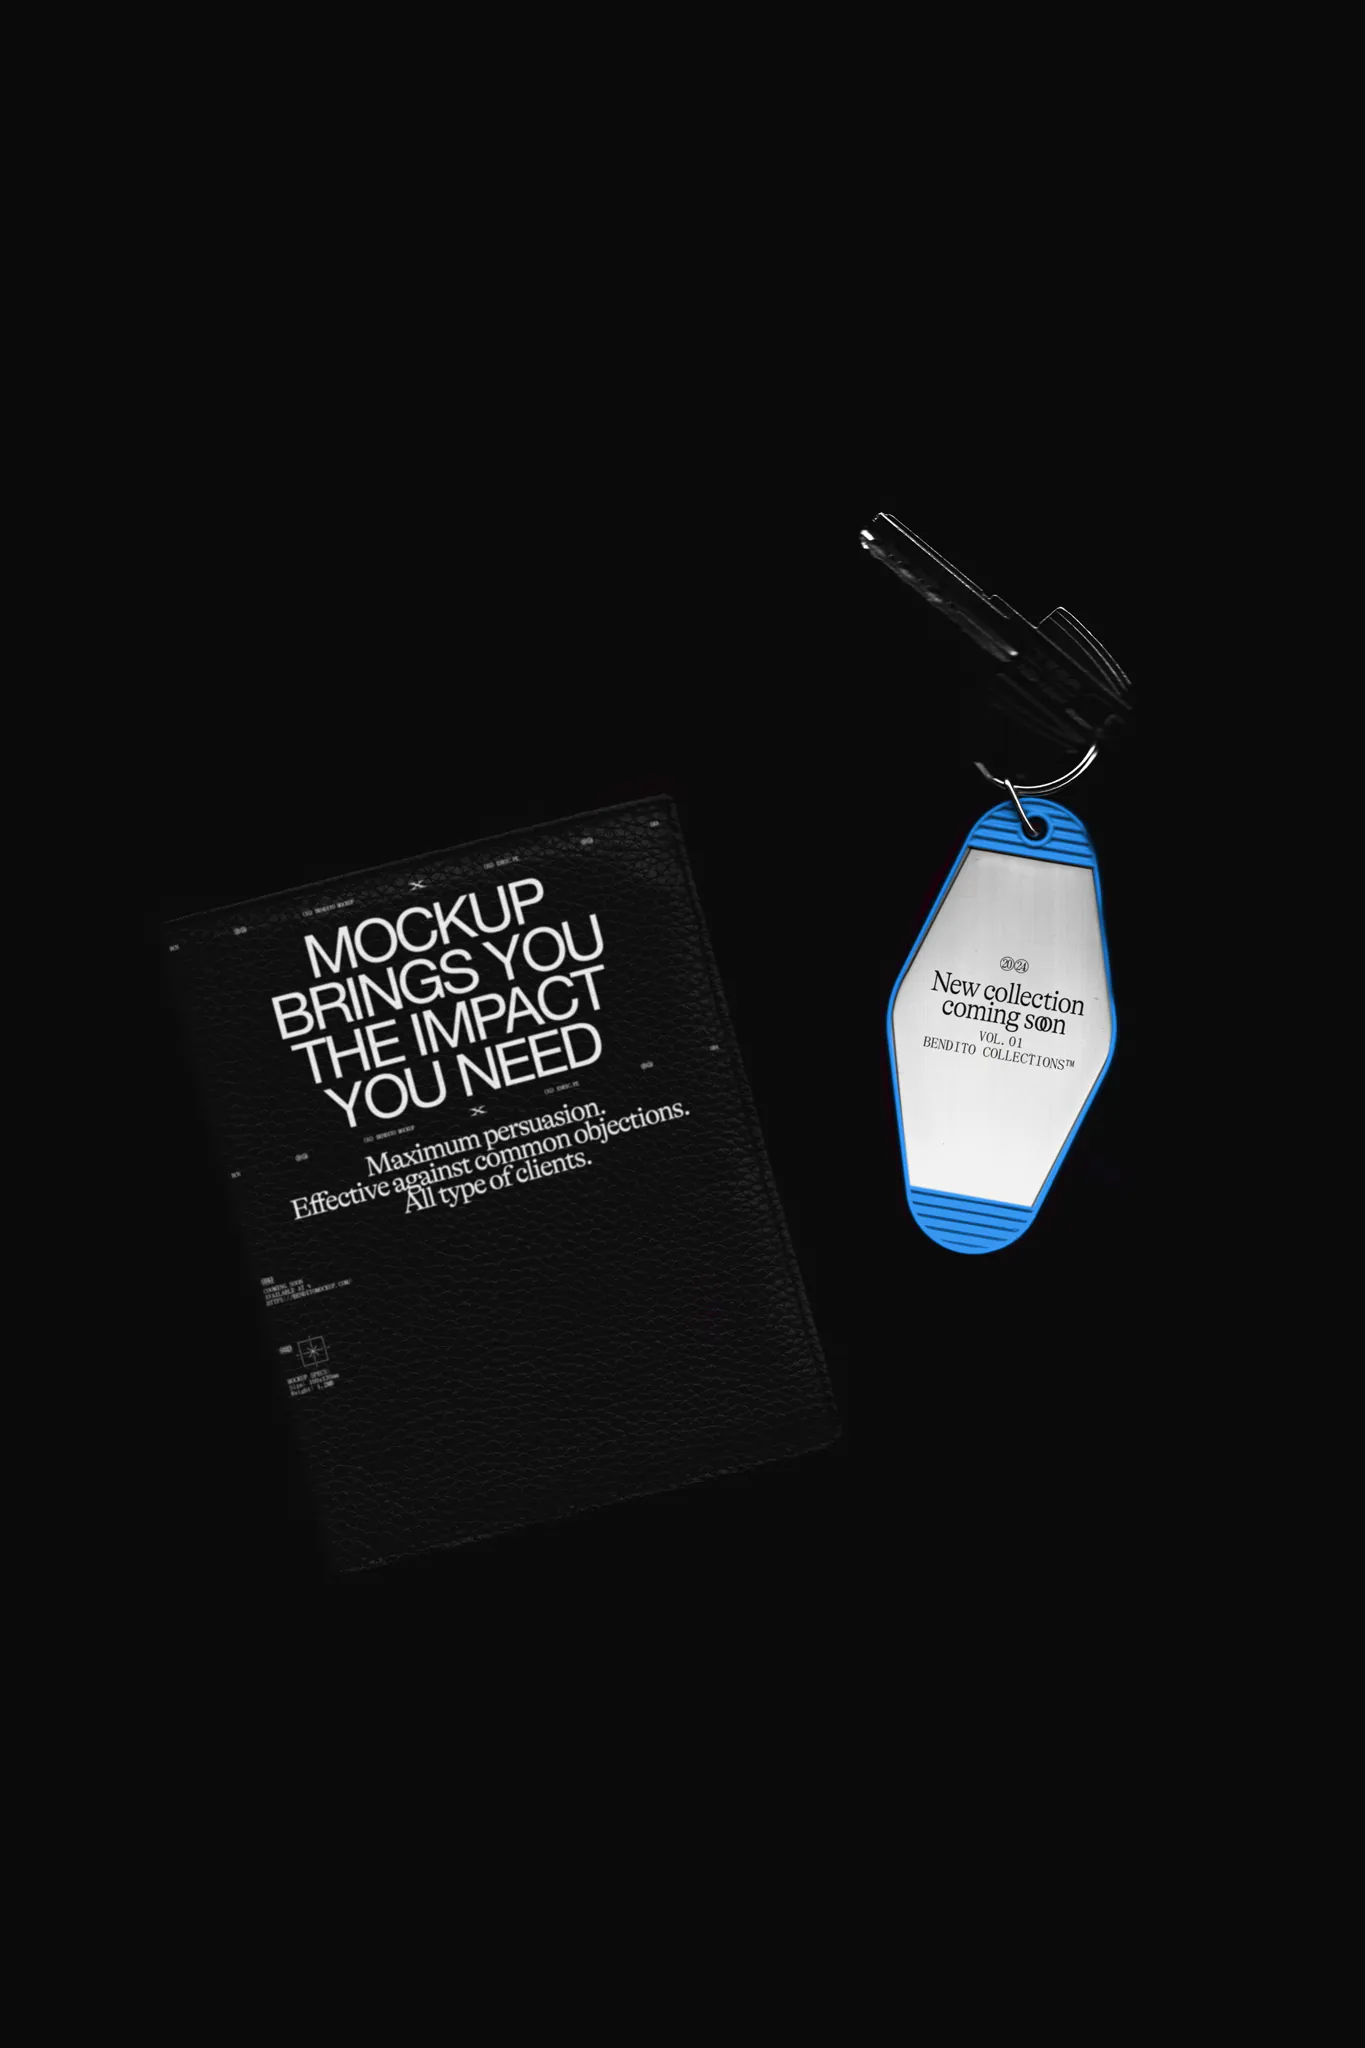 Premium keychain mockup with key and black wallet on black background. Minimalist style for showcasing brand identity and designs. High quality premium mockup.